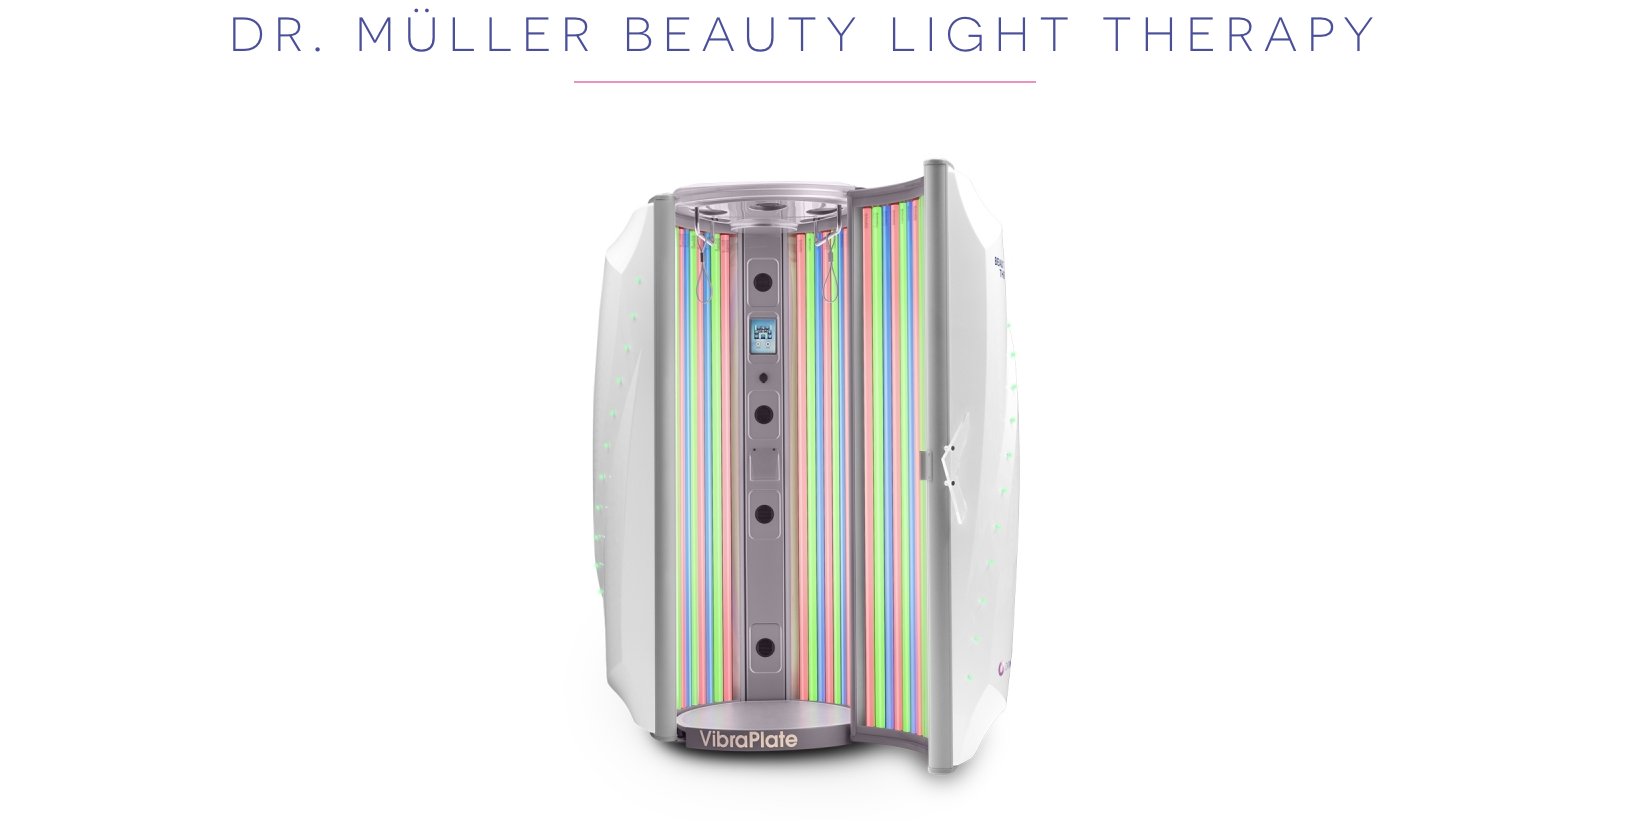 Dr. Müller Beauty Light Therapy